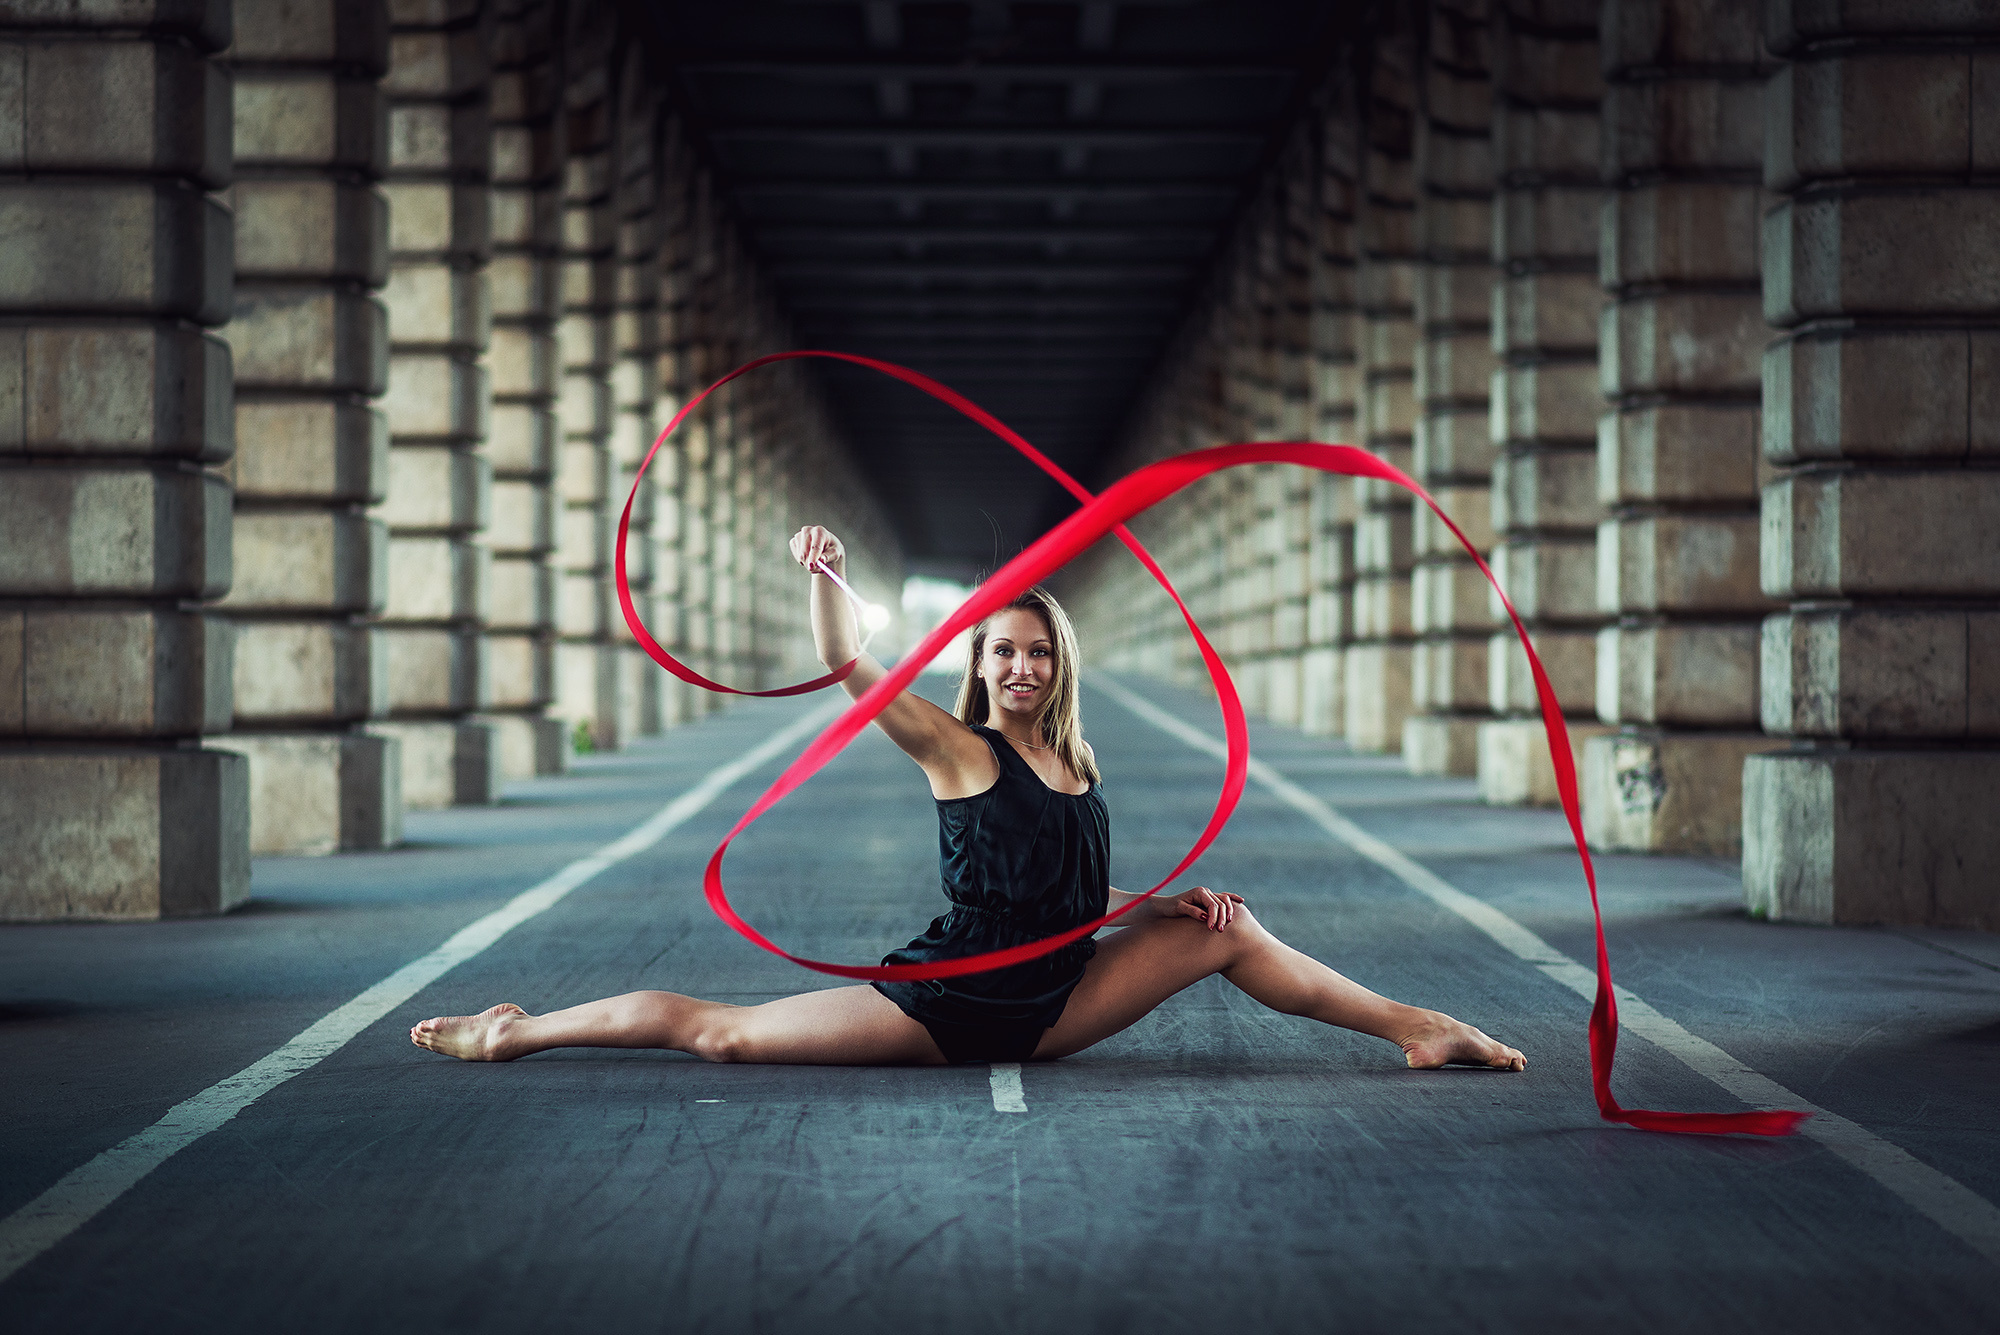 Rhythmic Gymnastics: An amateur gymnast performs a leg split while drawing in the air with a ribbon, Street artistic performance. 2000x1340 HD Wallpaper.